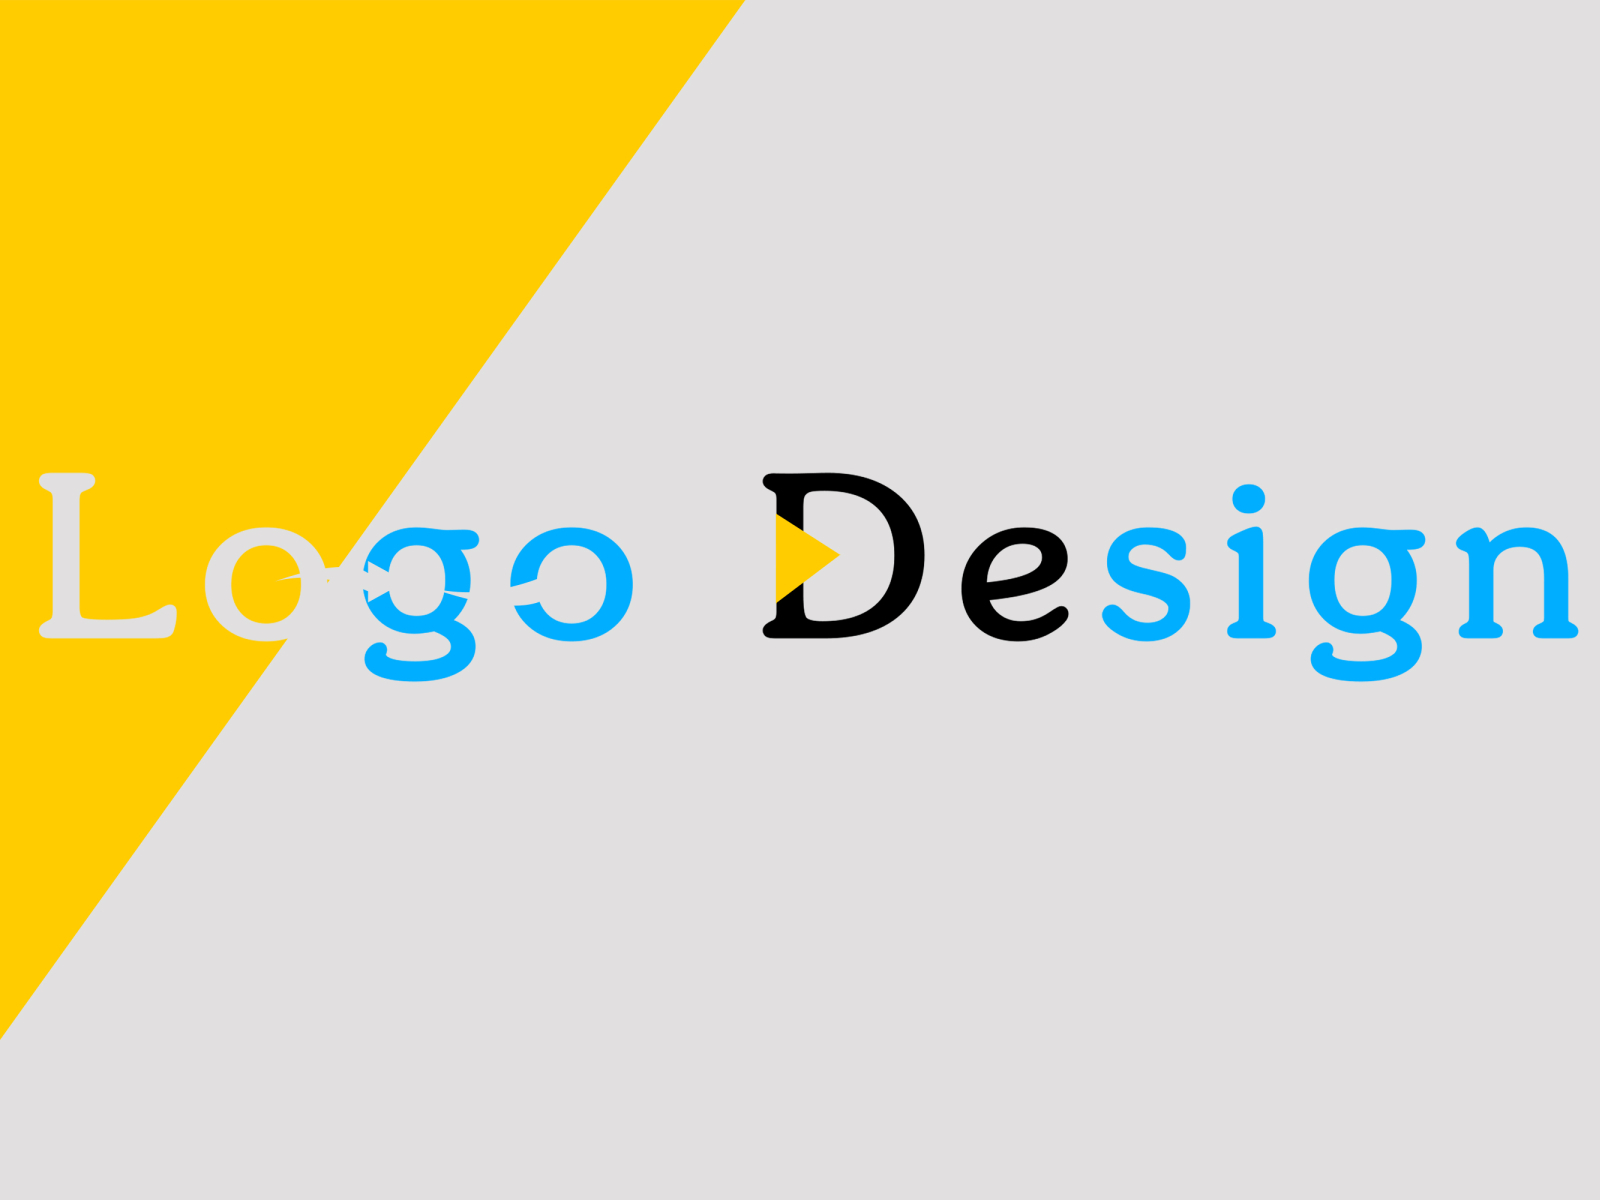 Go Sign by Fauzimqn on Dribbble